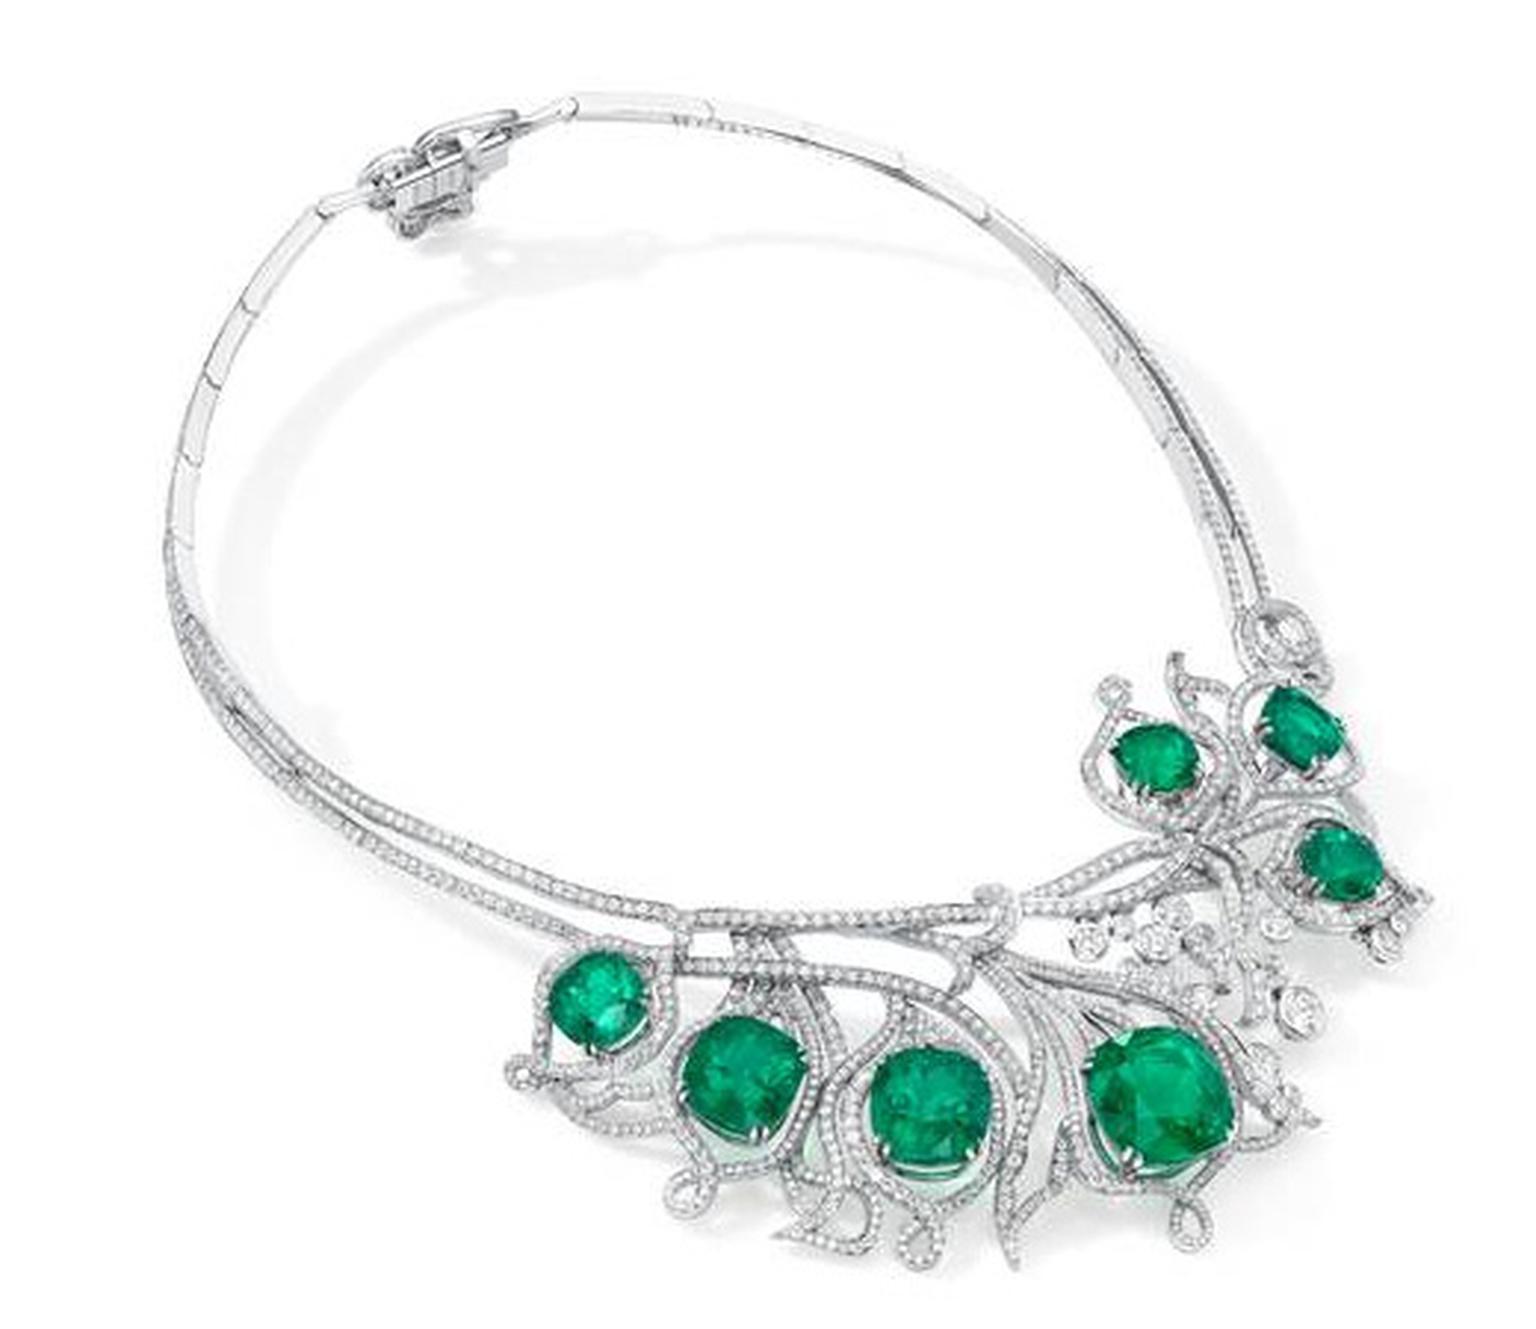 Boodles Greenfire collection necklace set with rare Colombian emeralds.